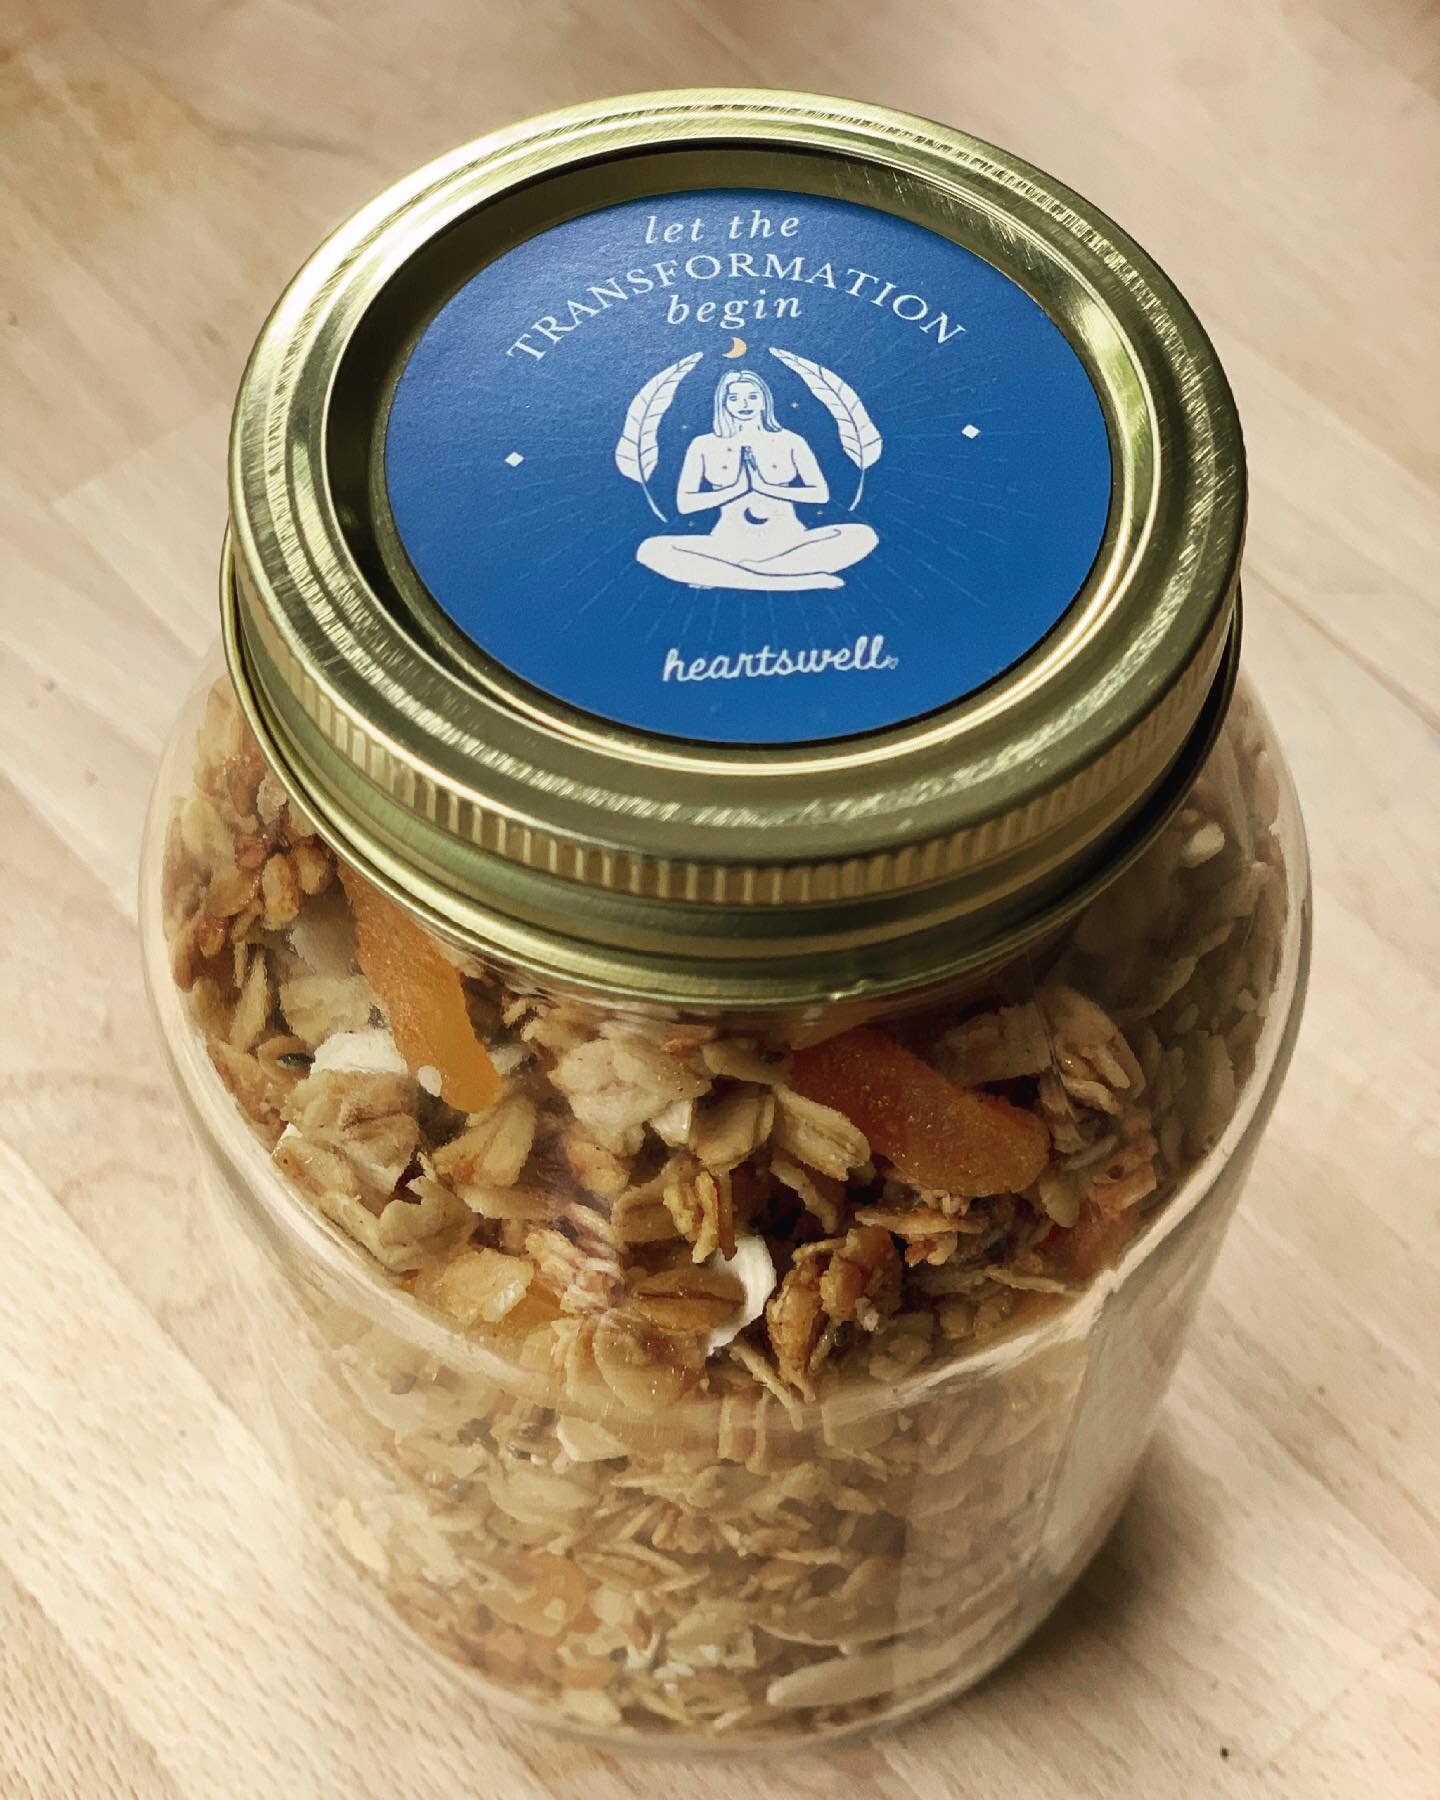 One of my favorite things to make for clients is granola. It&rsquo;s quick, easy, great for supply (for those breast/chest feeding) and makes the house smell amazing. It&rsquo;s also really easy to make it GF/Vegan, so it suits a wide array of dietar